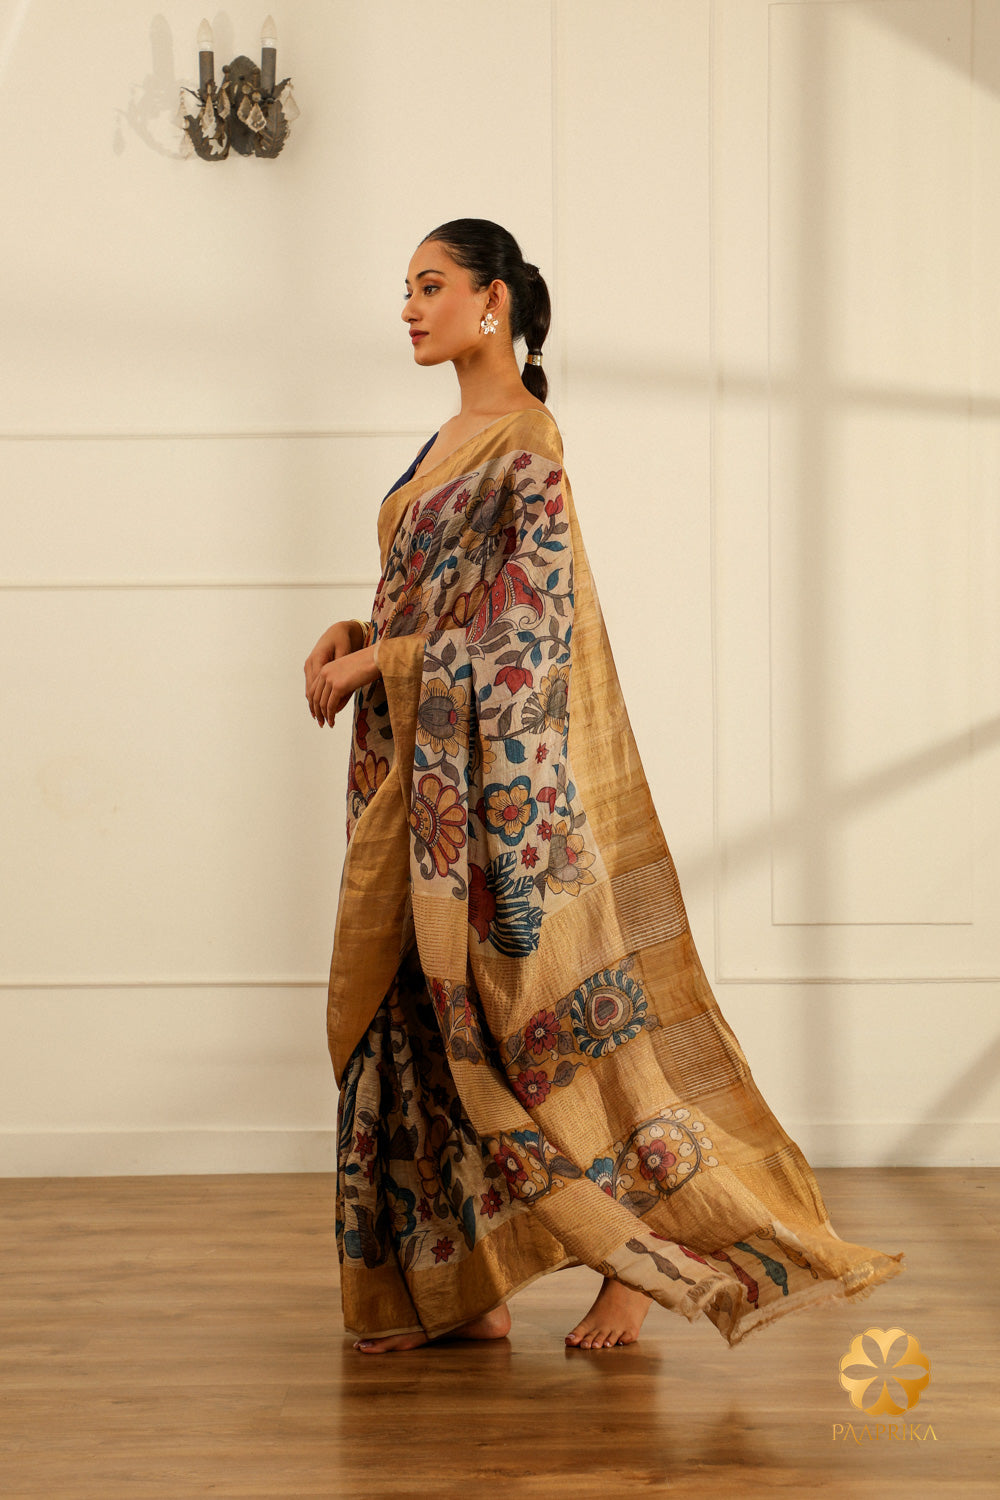 The saree elegantly displayed on a mannequin, capturing the beauty of the Kalamkari floral motifs and the lustrous Tussar silk in a serene cream hue.